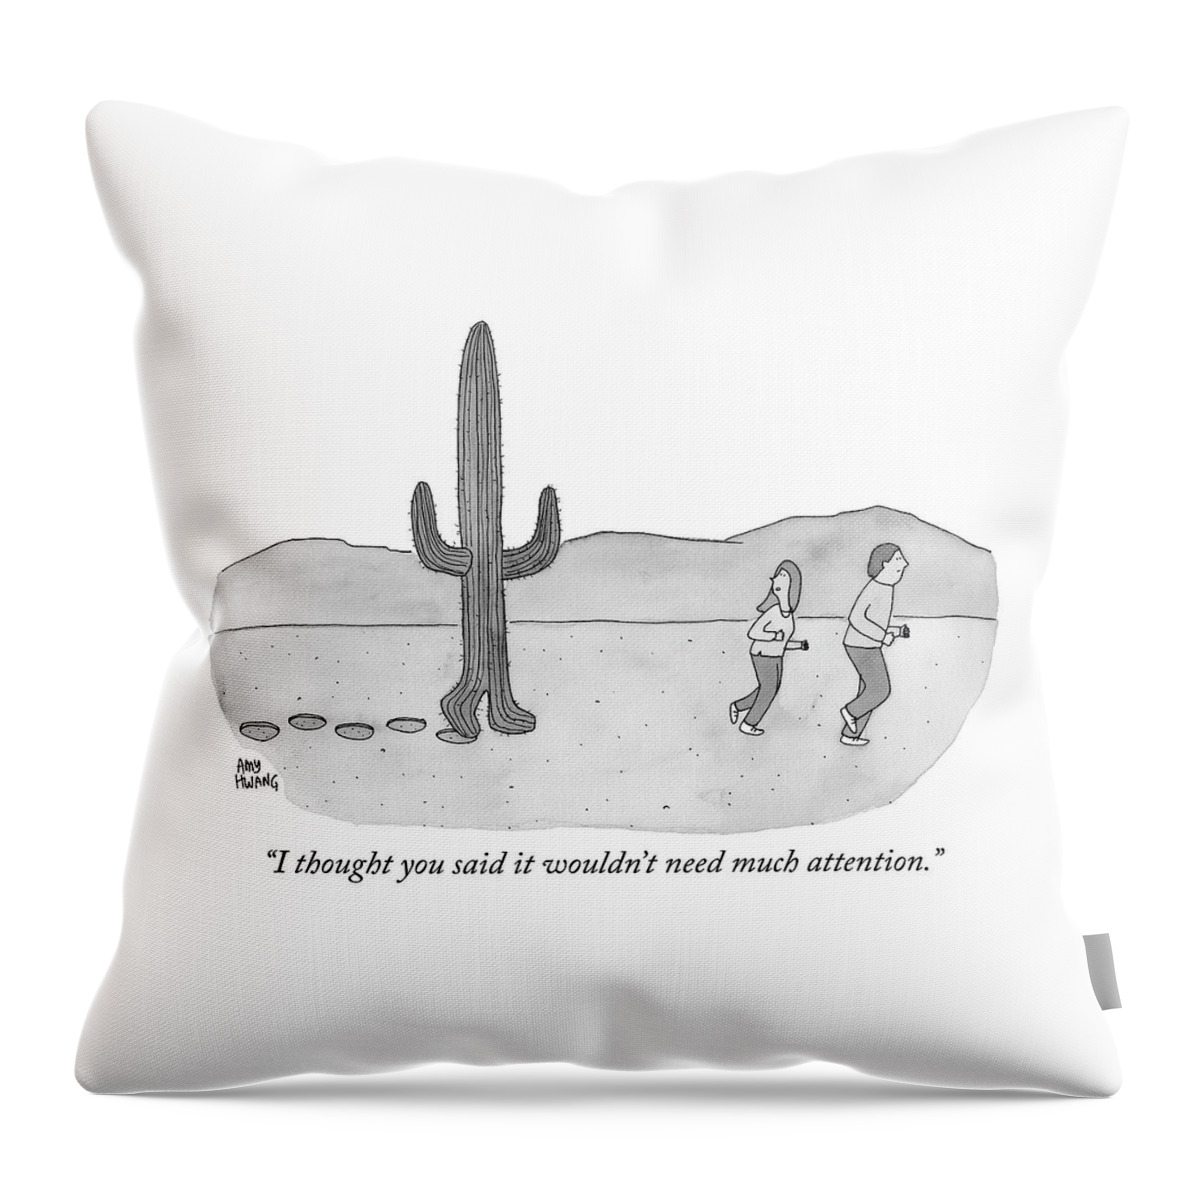 Attention Throw Pillow